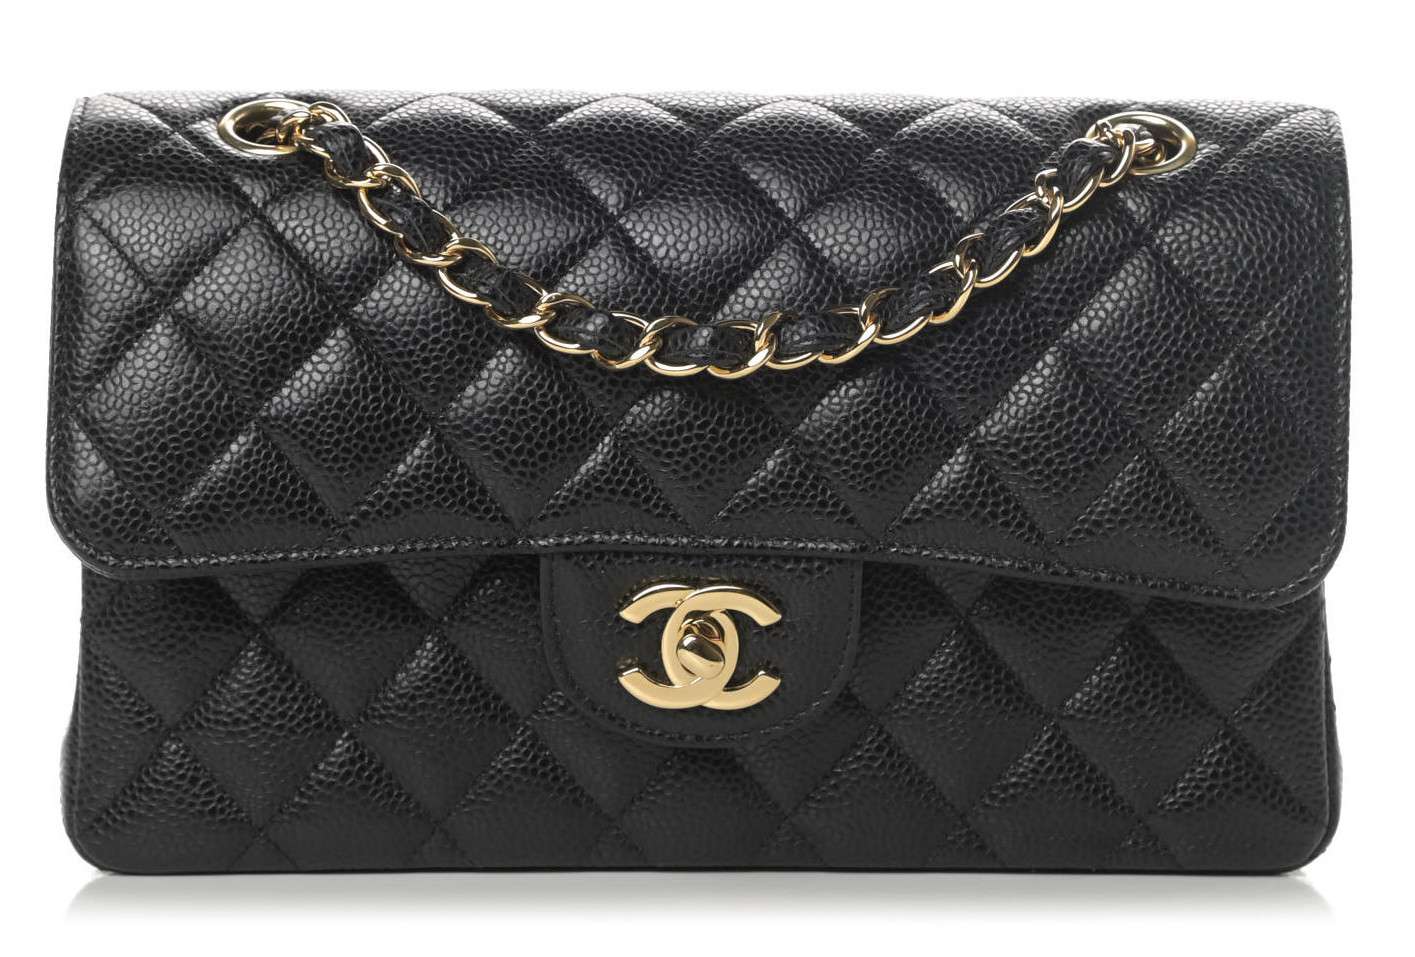 Chanel Small Classic Flap Black Caviar Leather